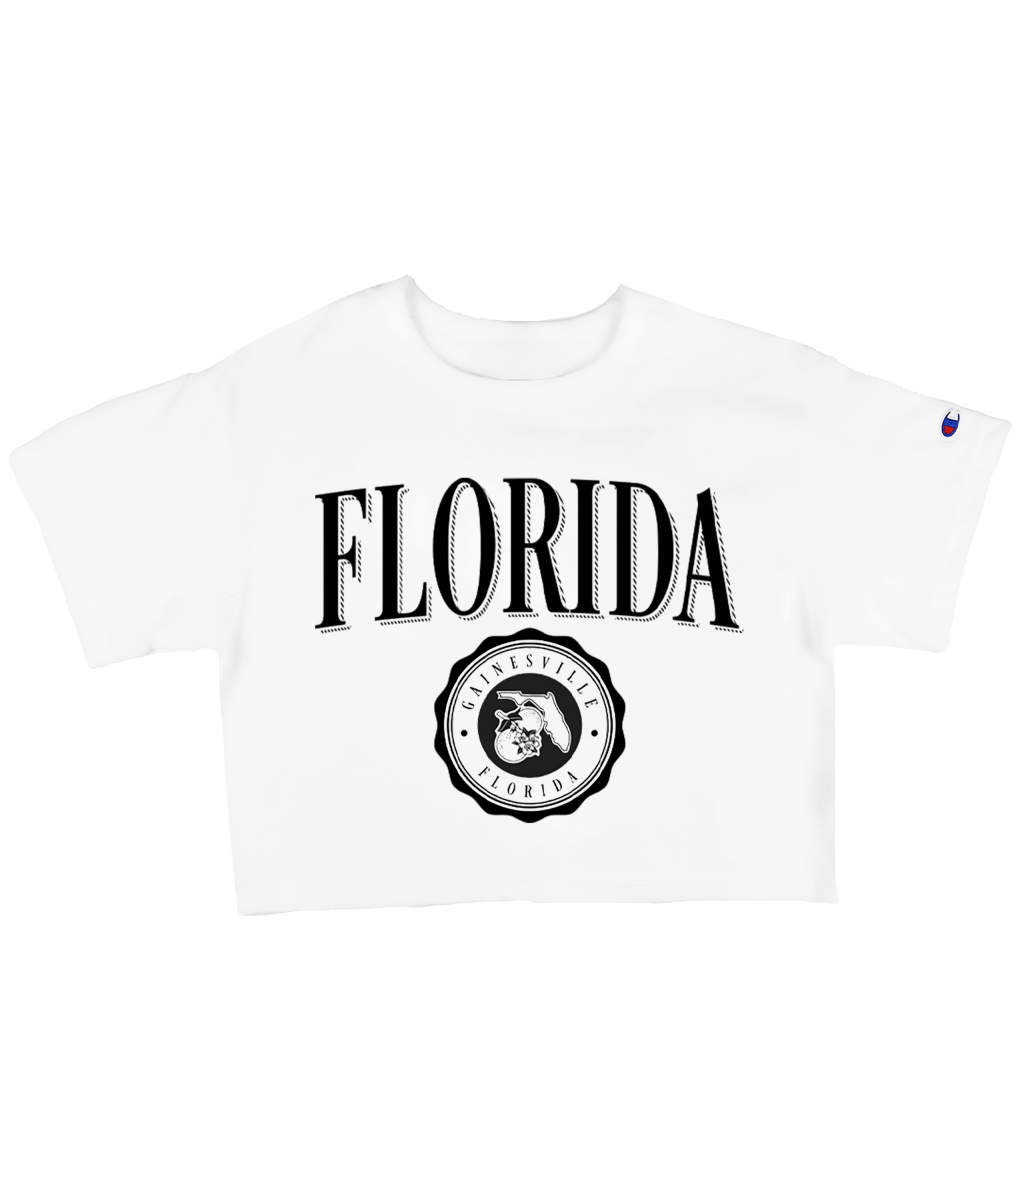 Florida Stamp of Approval Cropped T-Shirt - Shop B-Unlimited